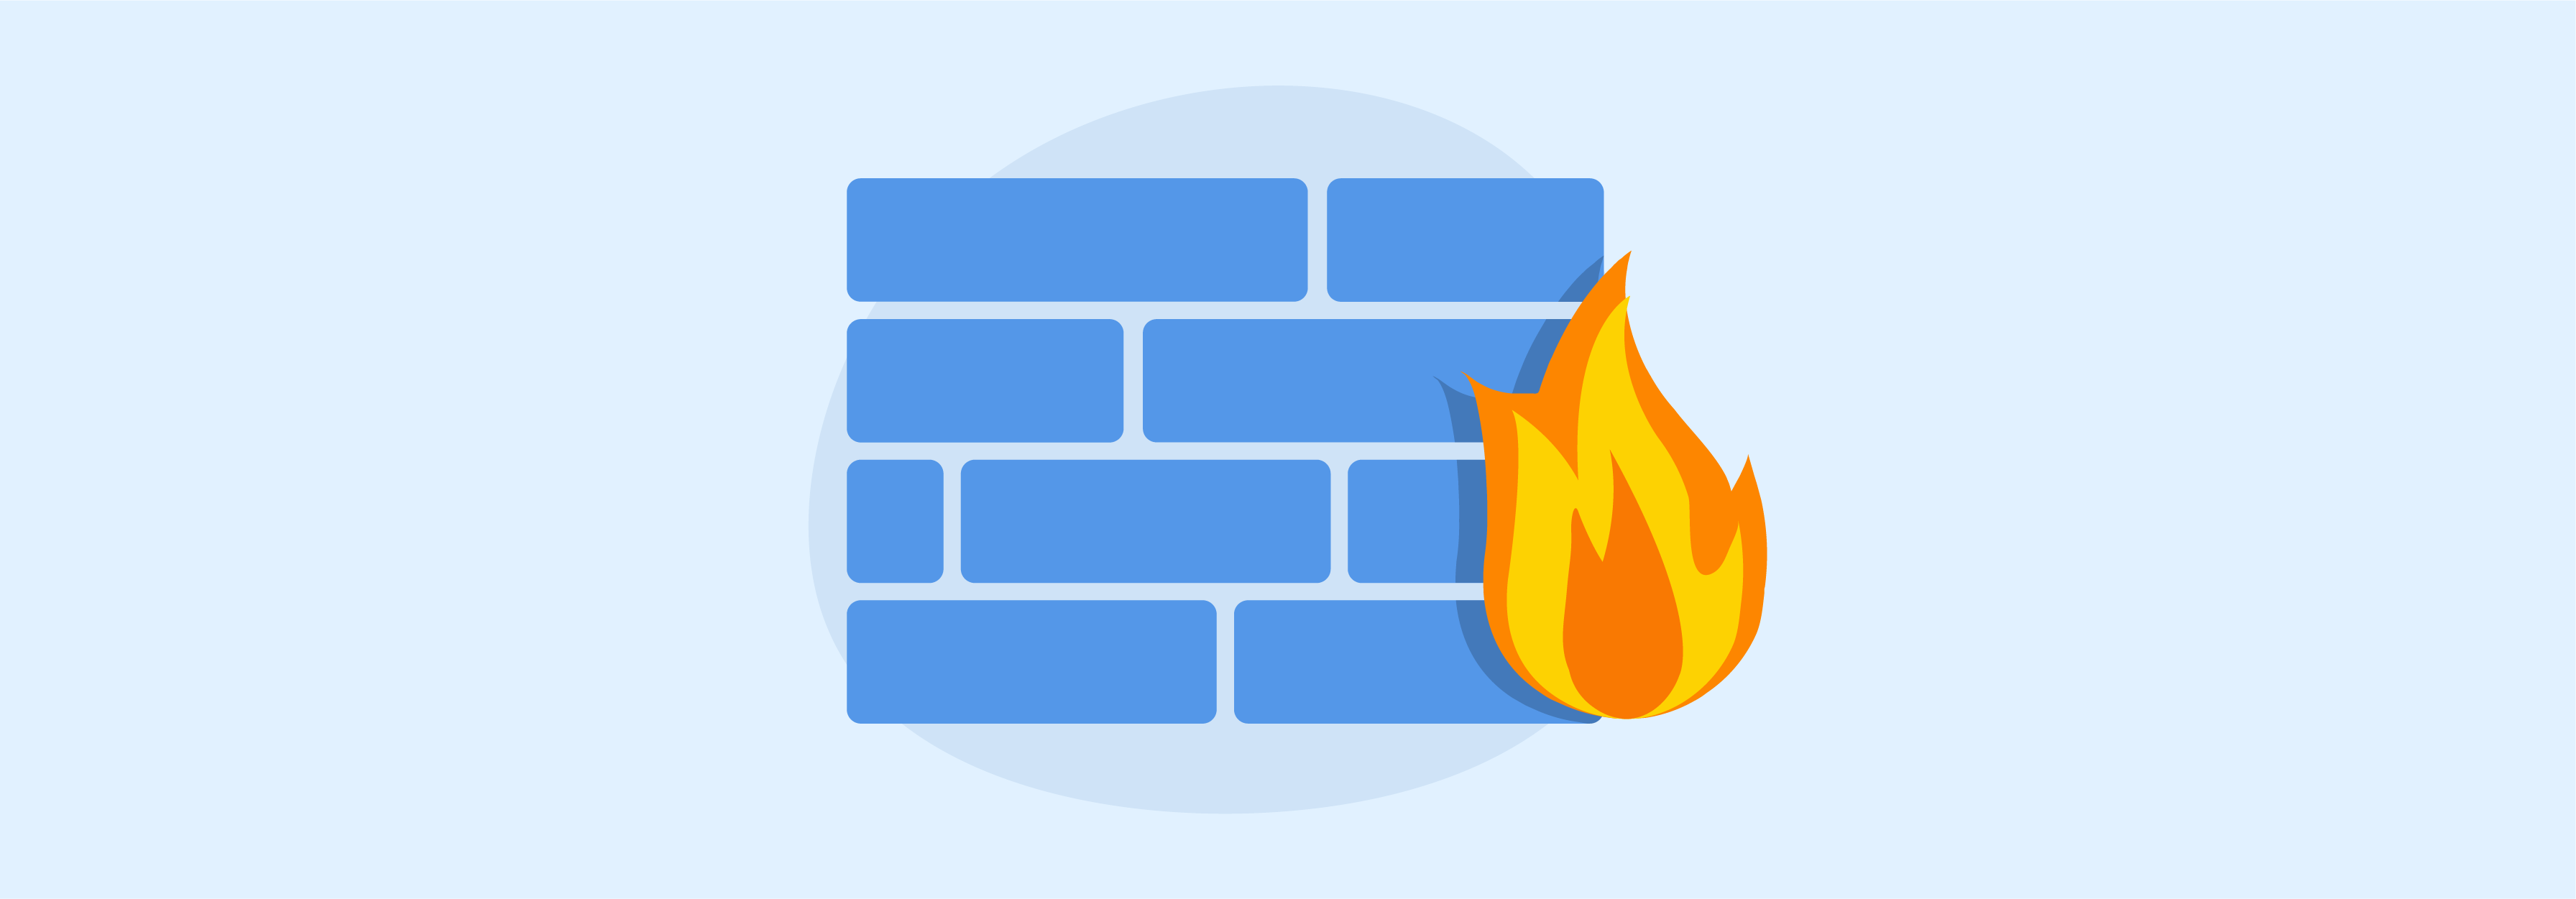 Web Application Firewall as a part of Magento security